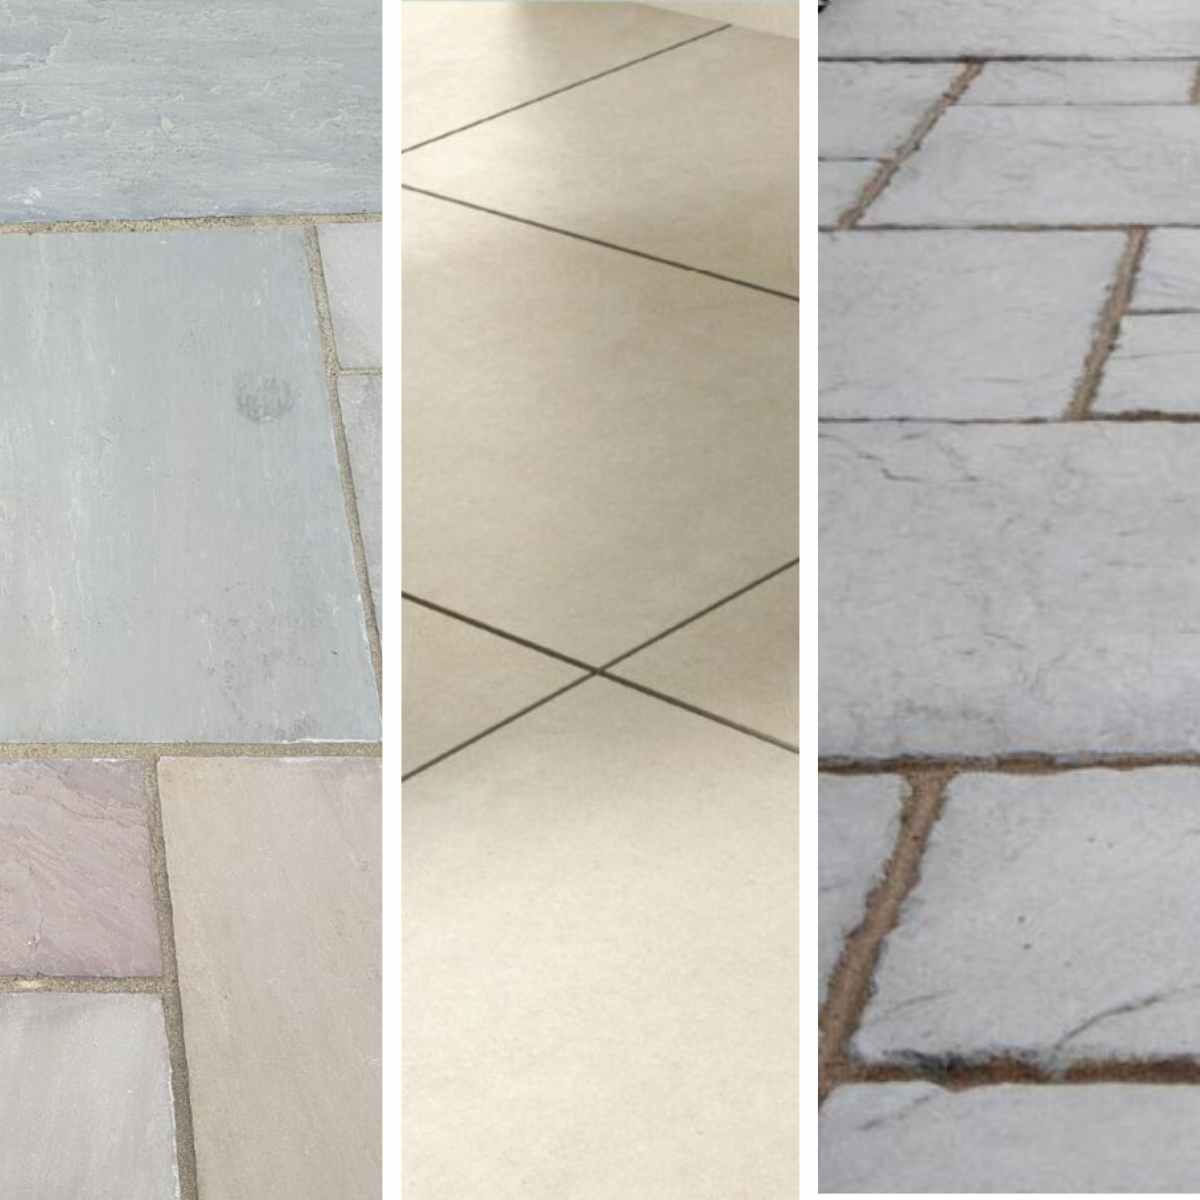 Natural Stone, Porcelain or Concrete - Which Paving Should I Choose?